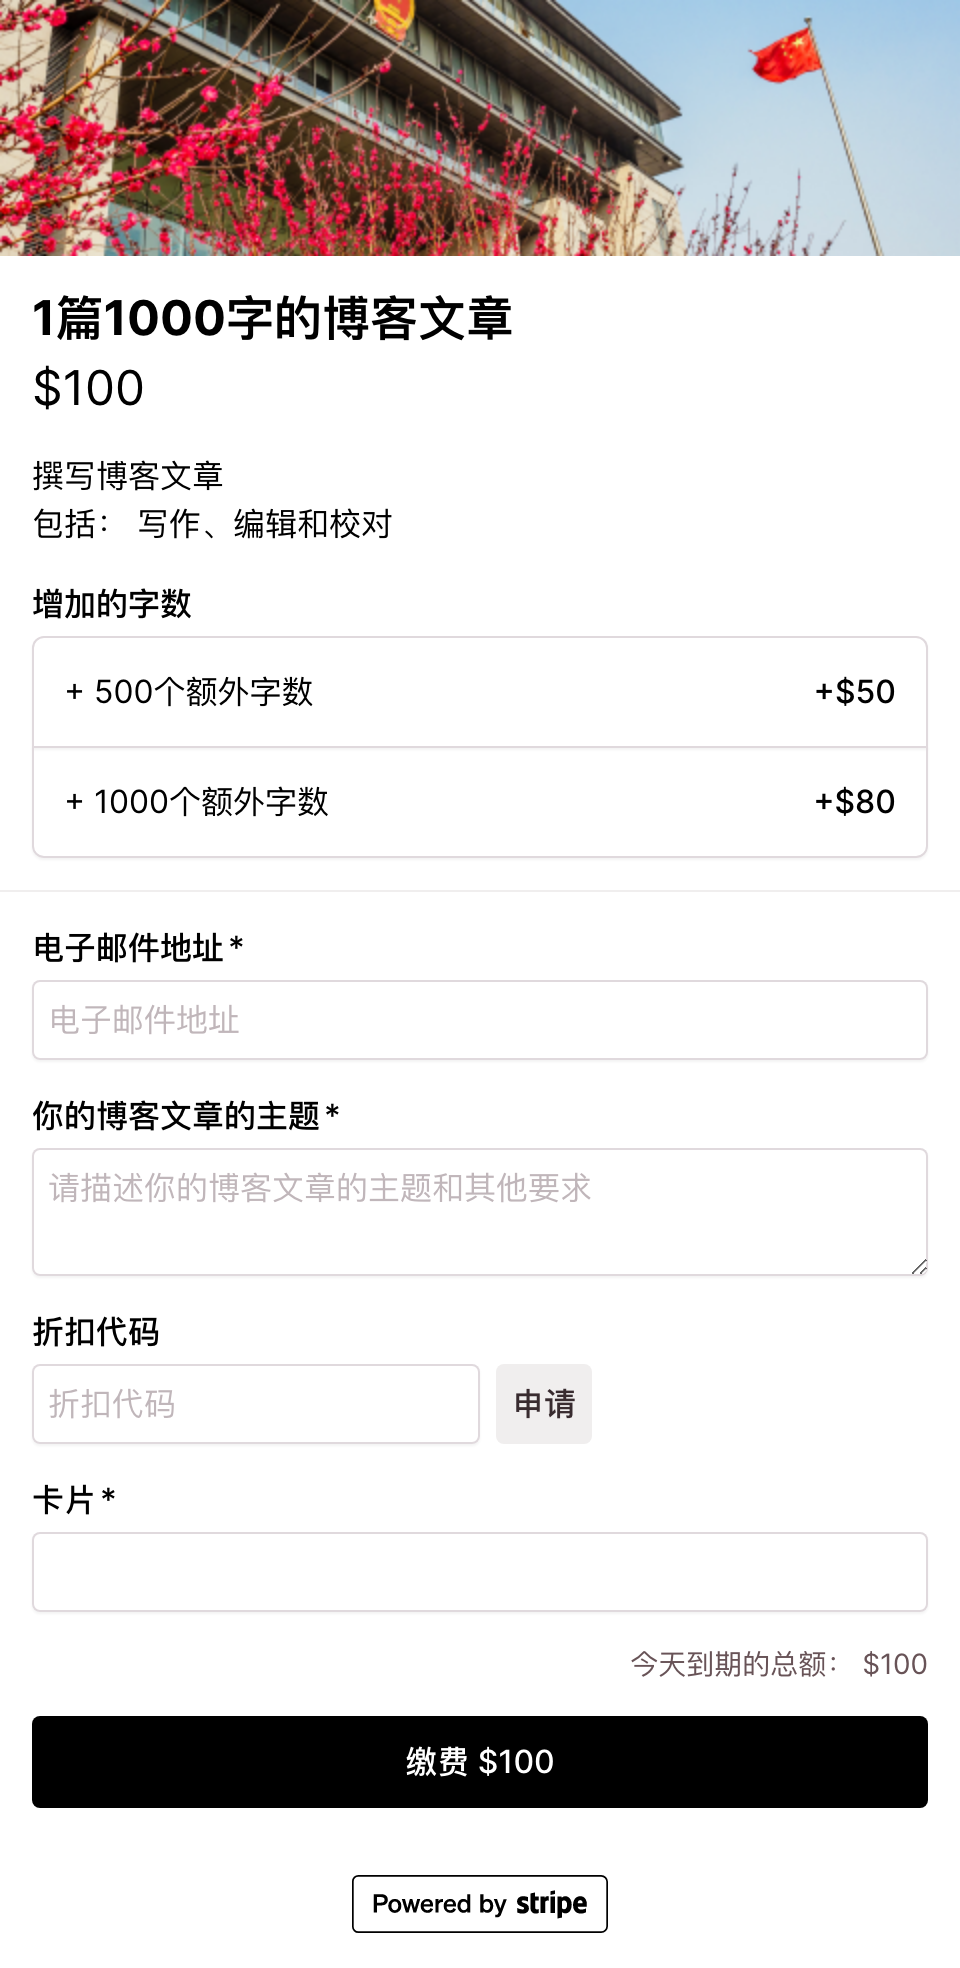 Chinese (simplified) translated checkout form